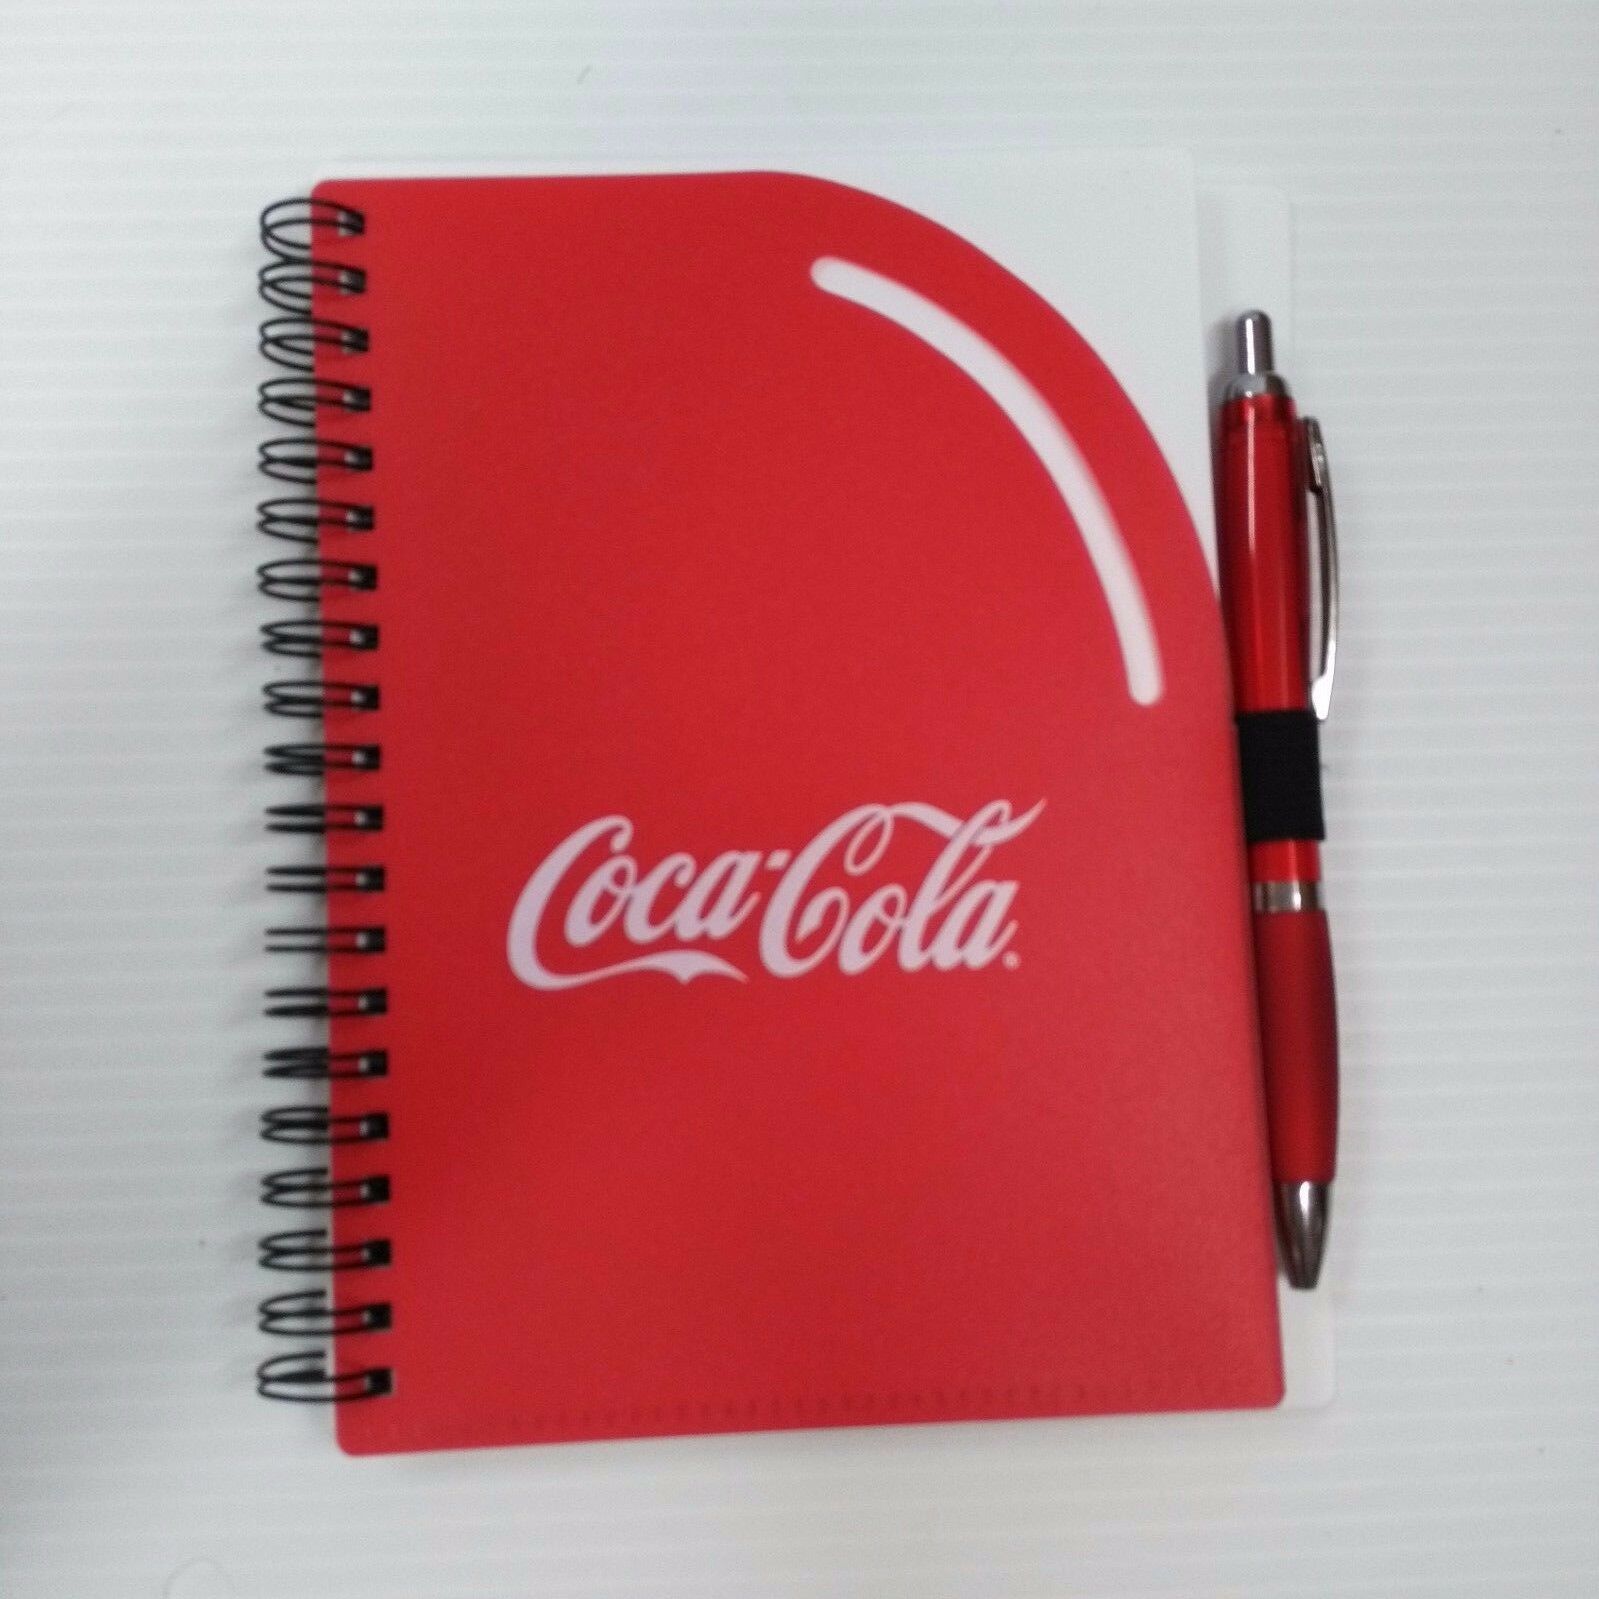 Coca-cola Spiral Notebook With Pen - Free Shipping